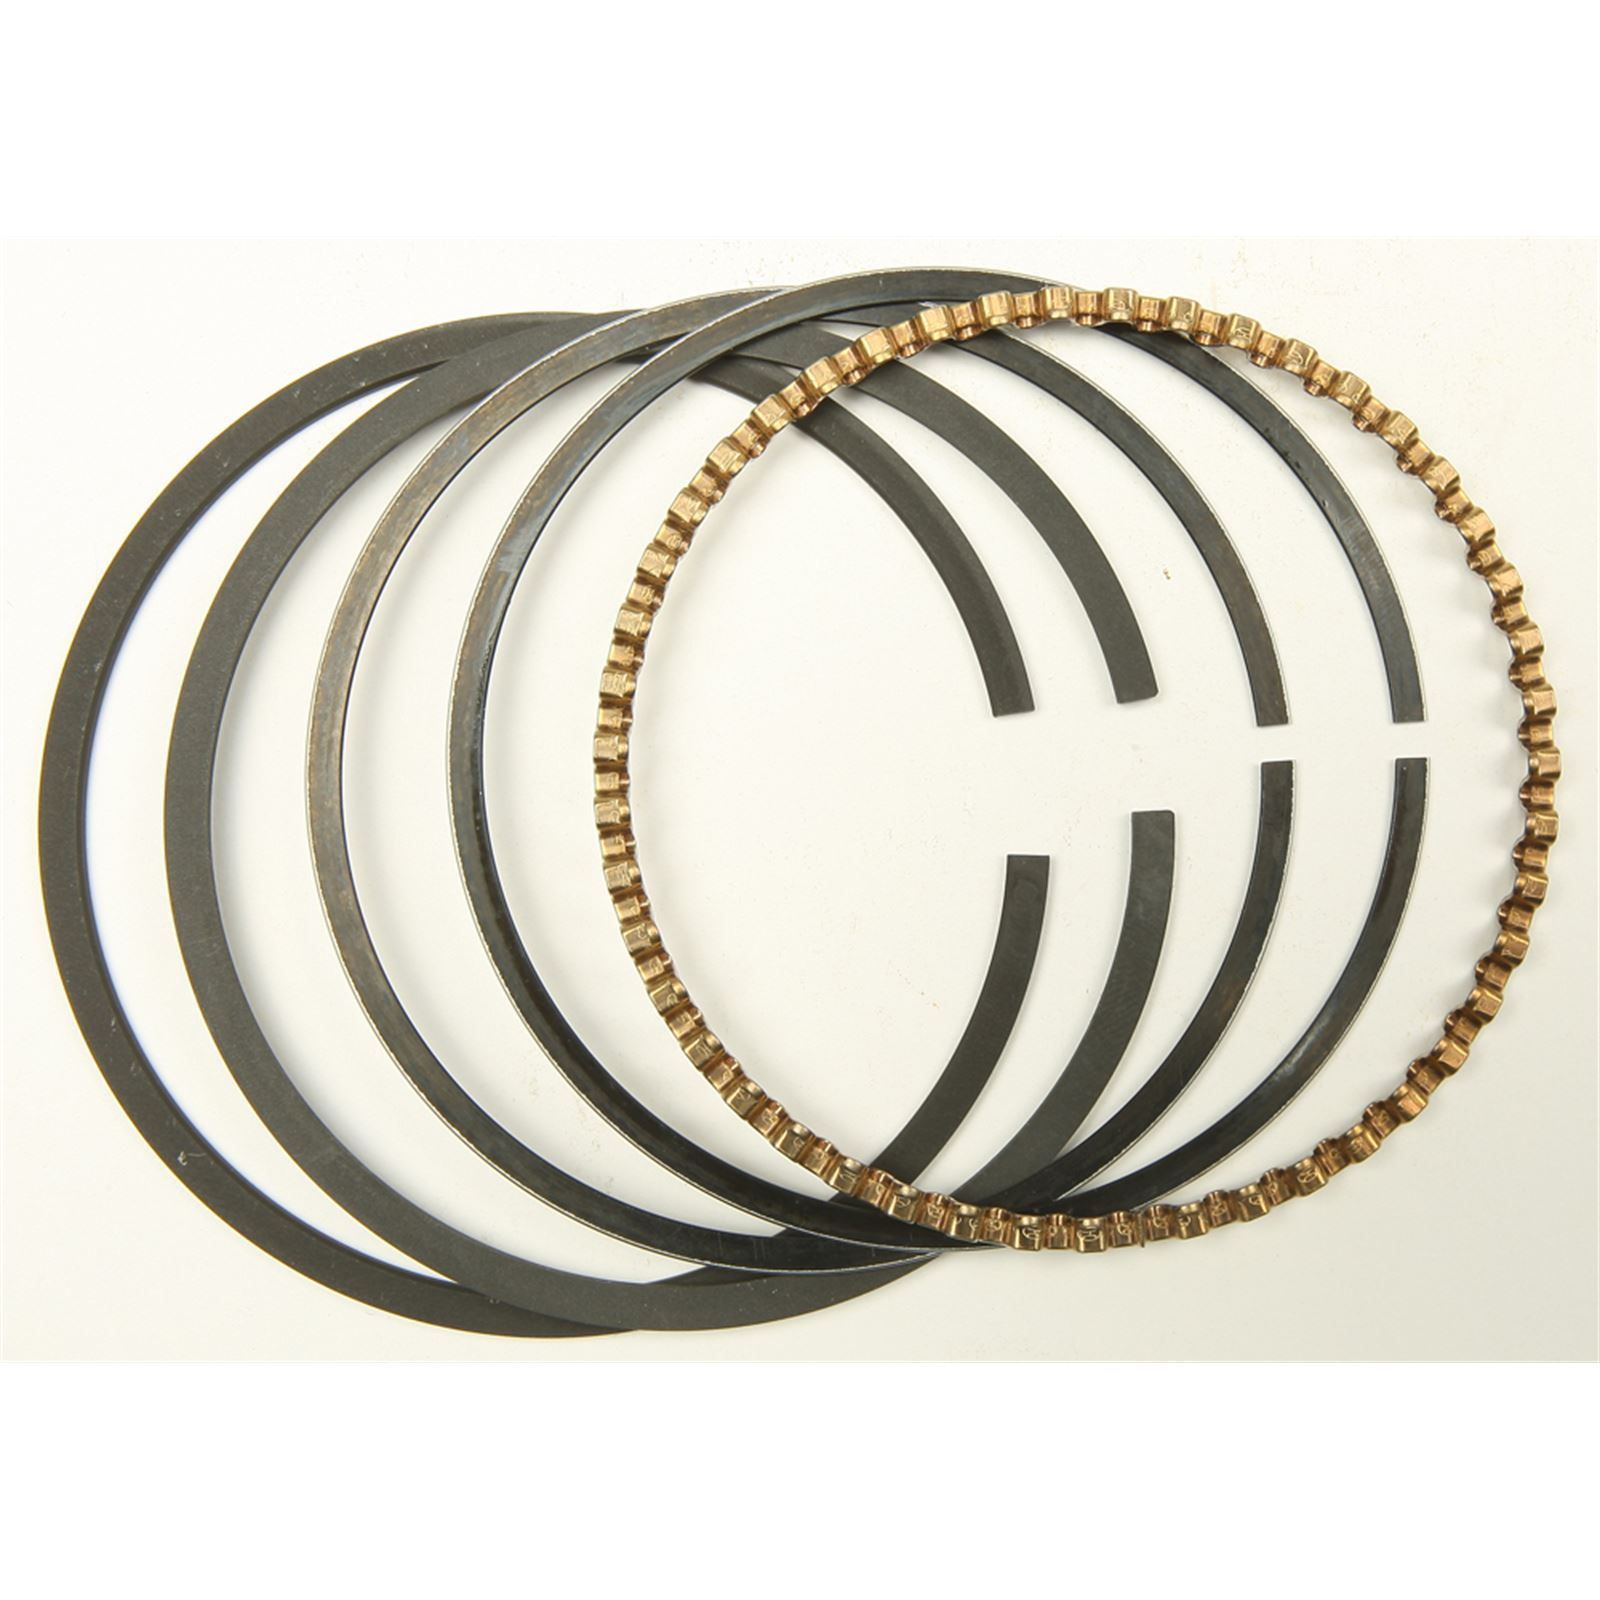 Wiseco Piston Rings For Wiseco Pistons Only